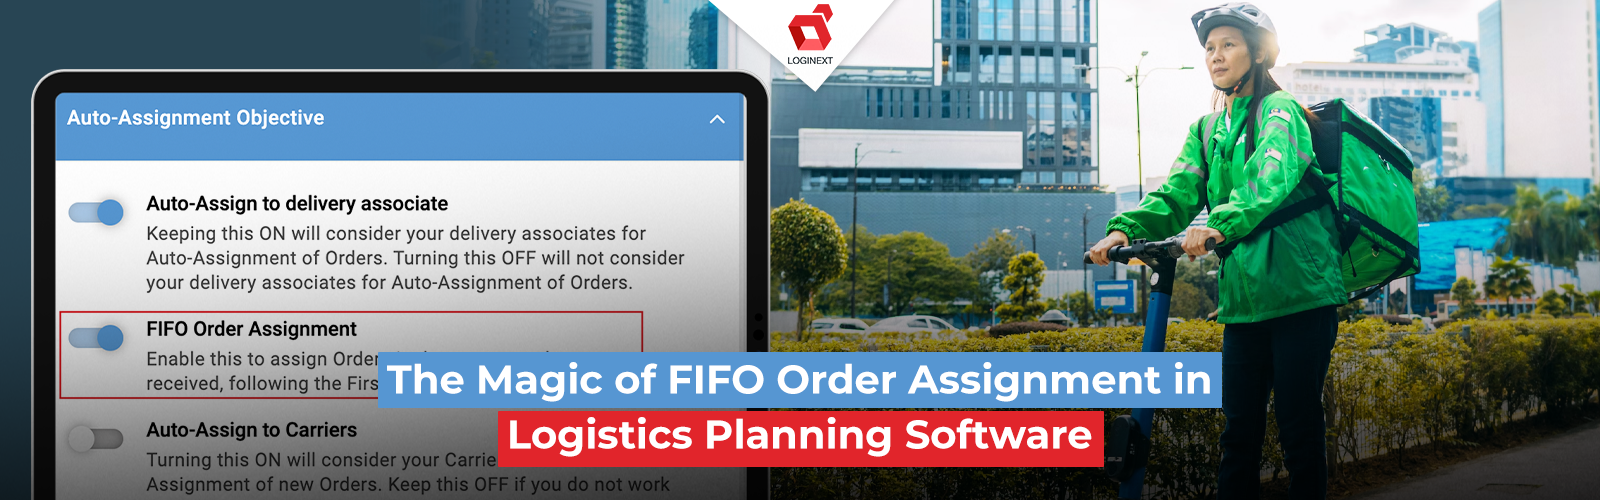 FIFO Order Assignment Strategy in Logistics Planning Software